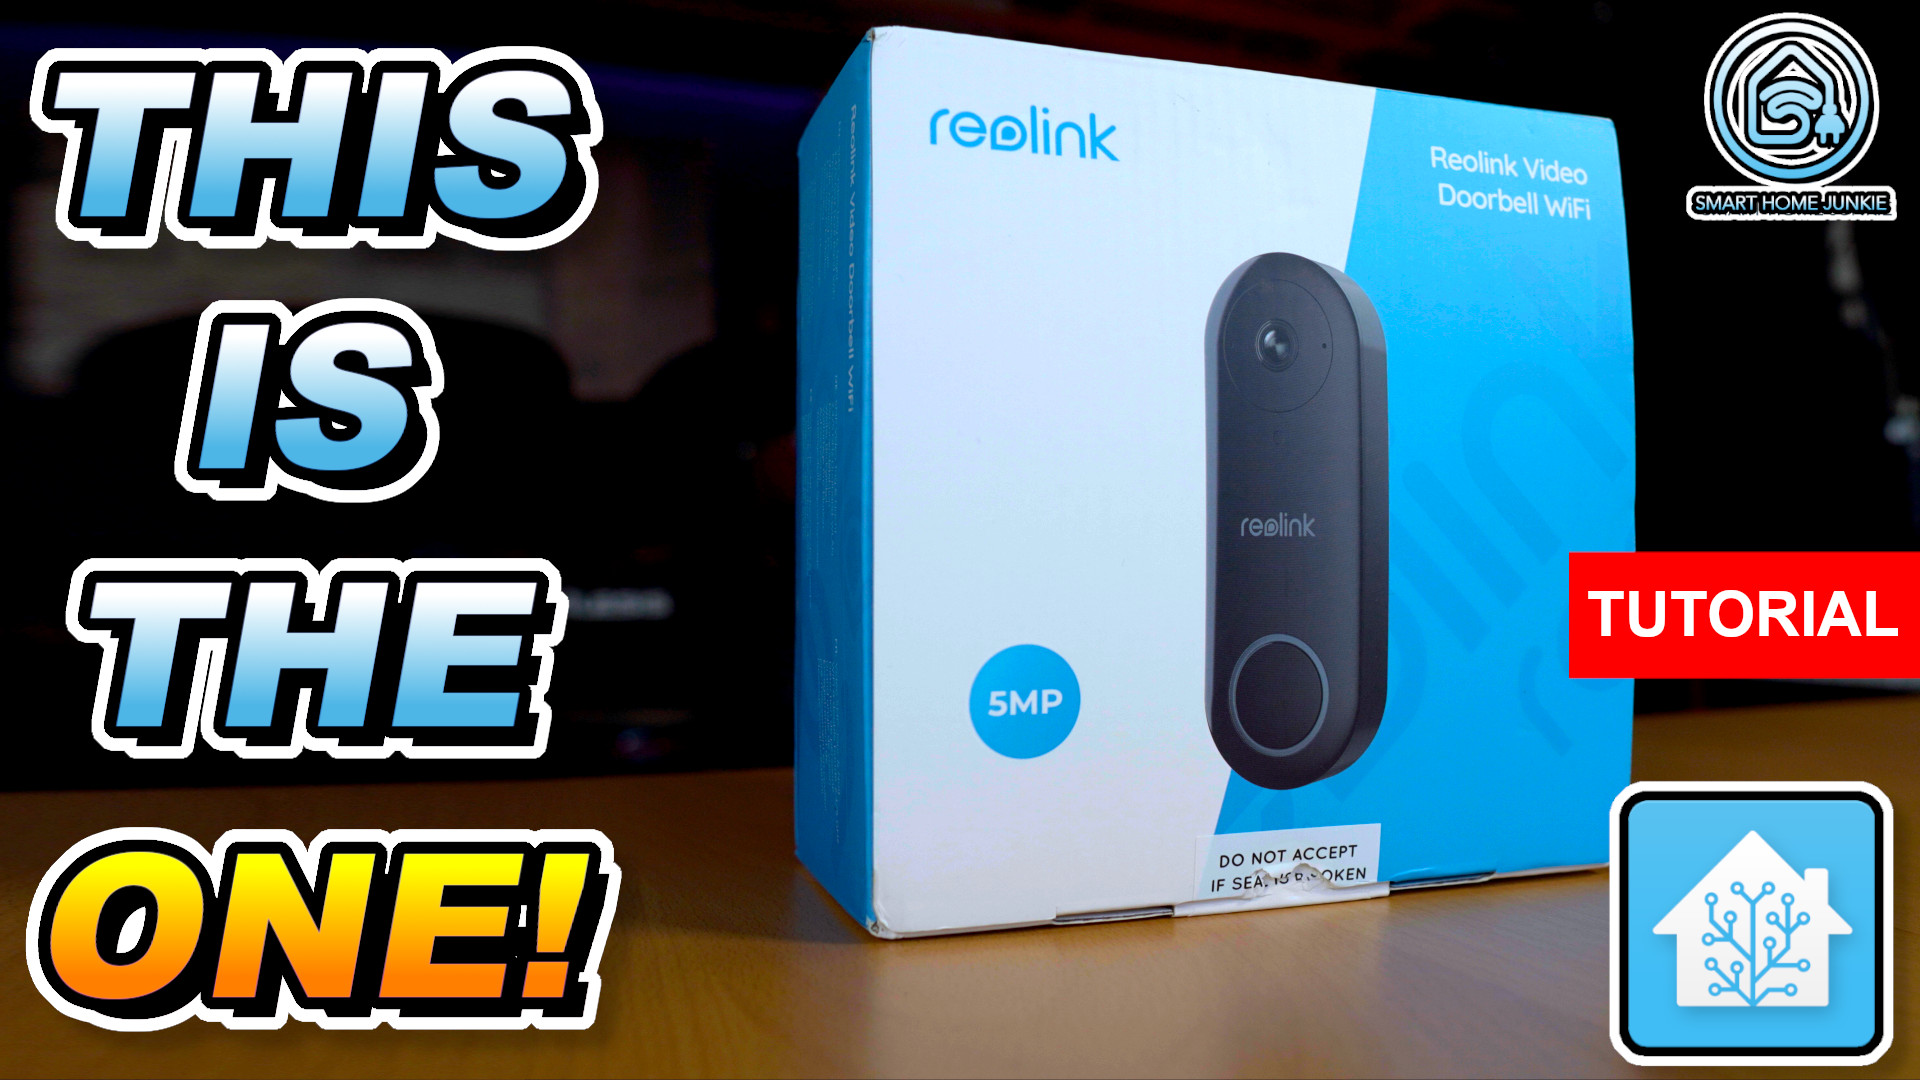 This is the ULTIMATE Video Doorbell that we’ve all been waiting for!